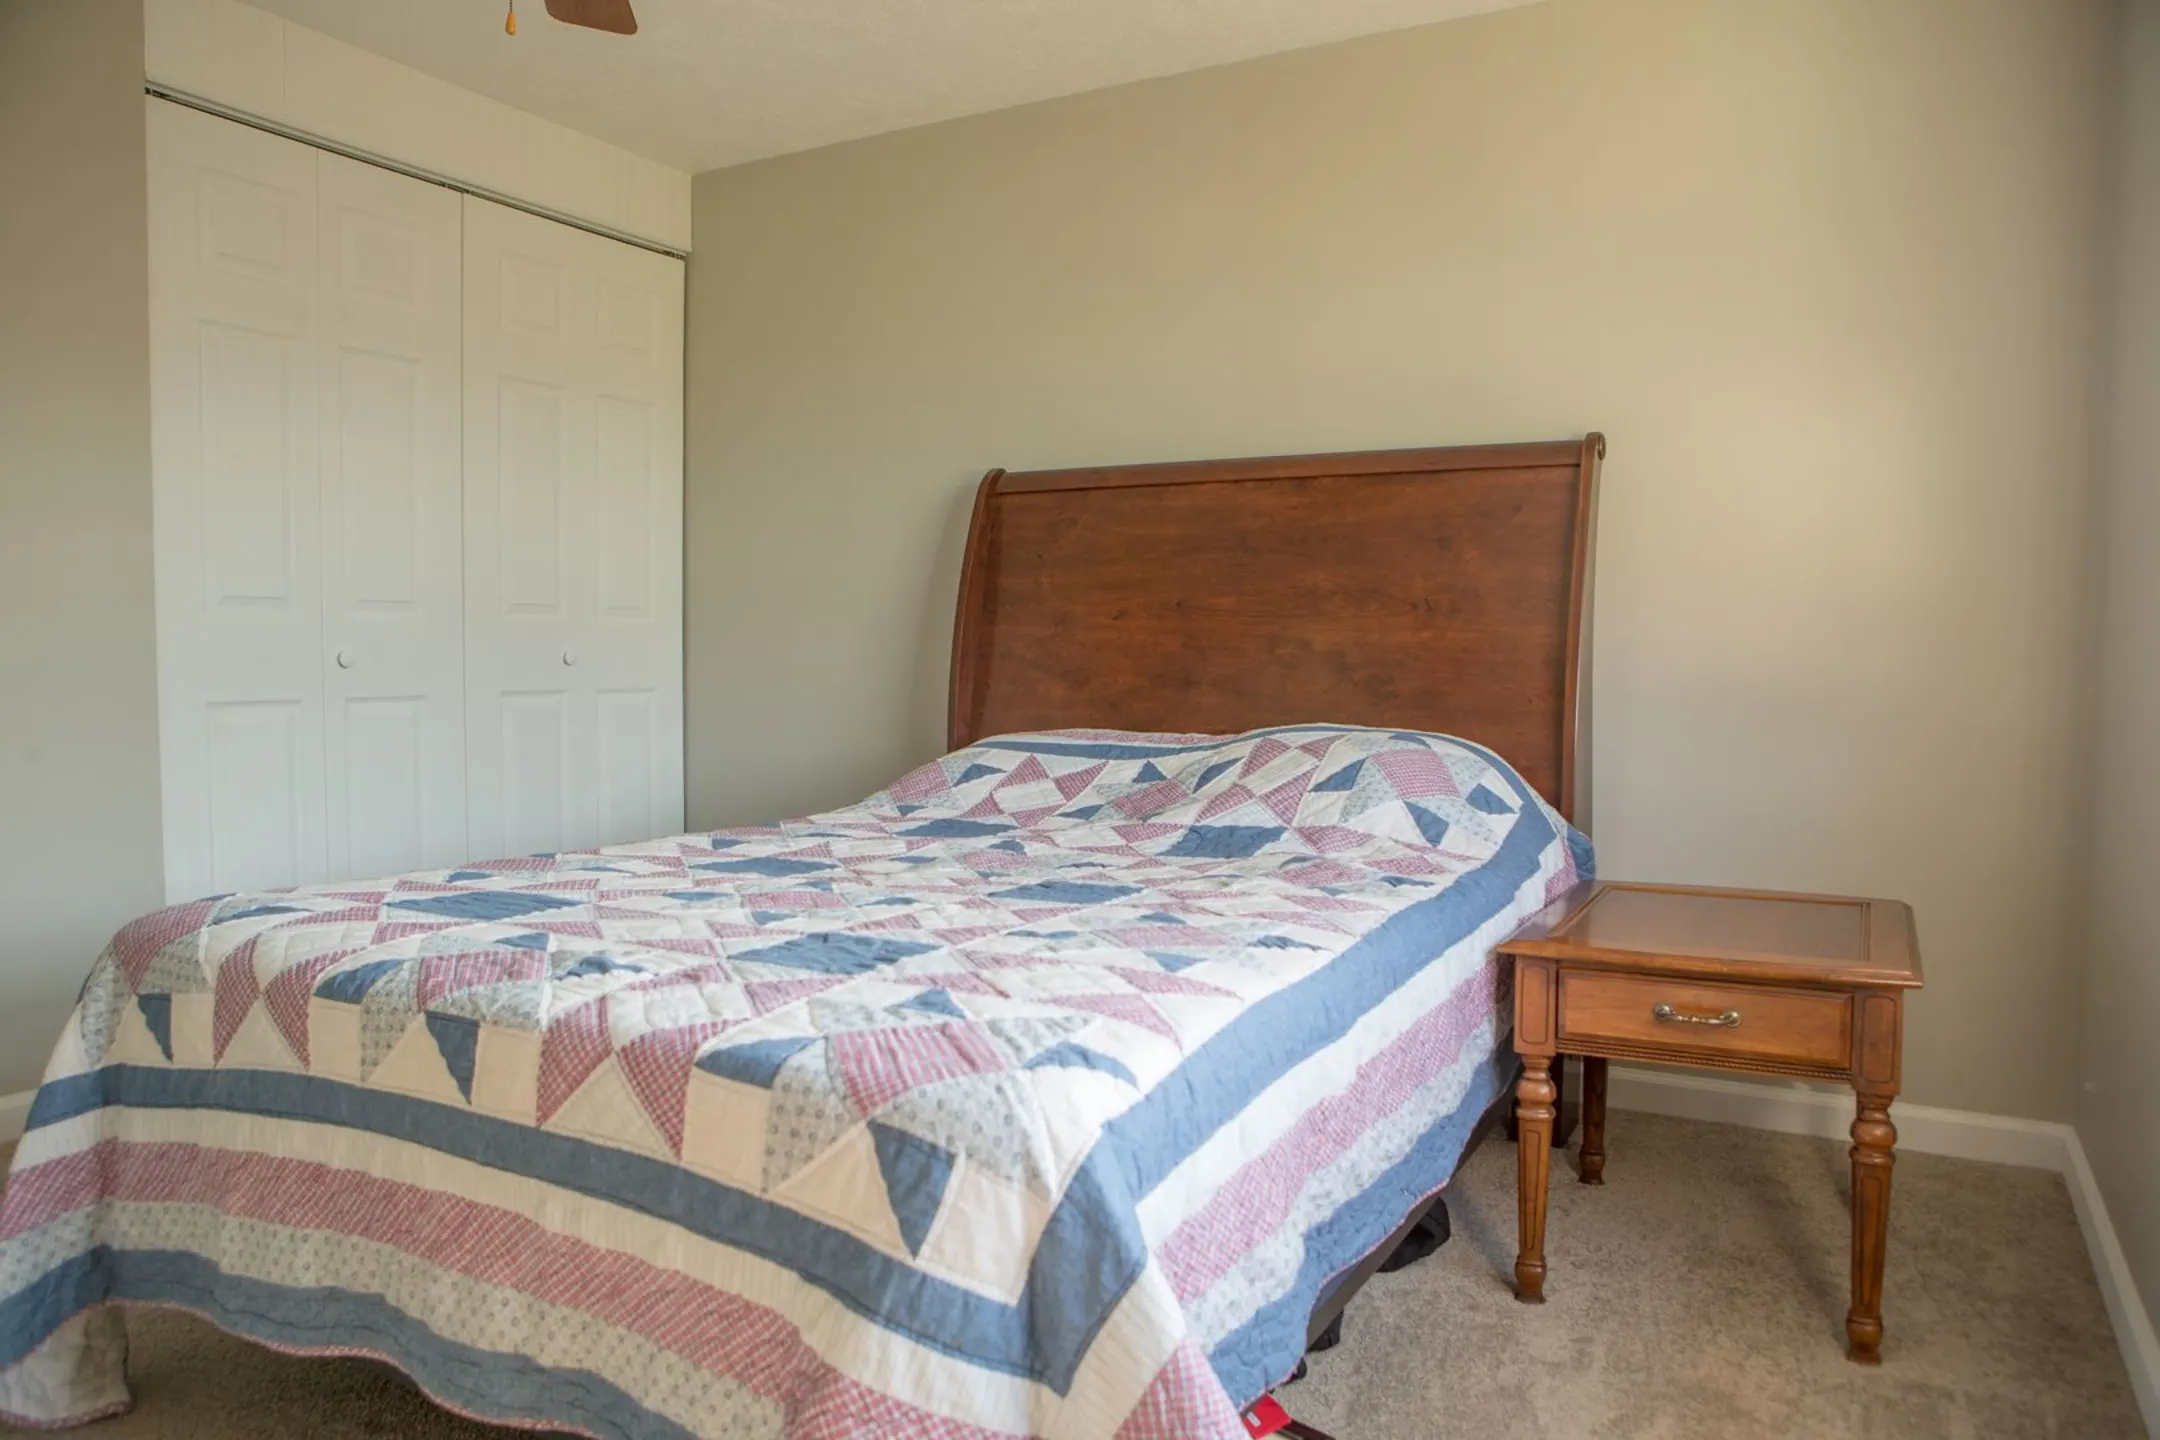 Bedroom - Aster Court Apartments - Springfield, OH